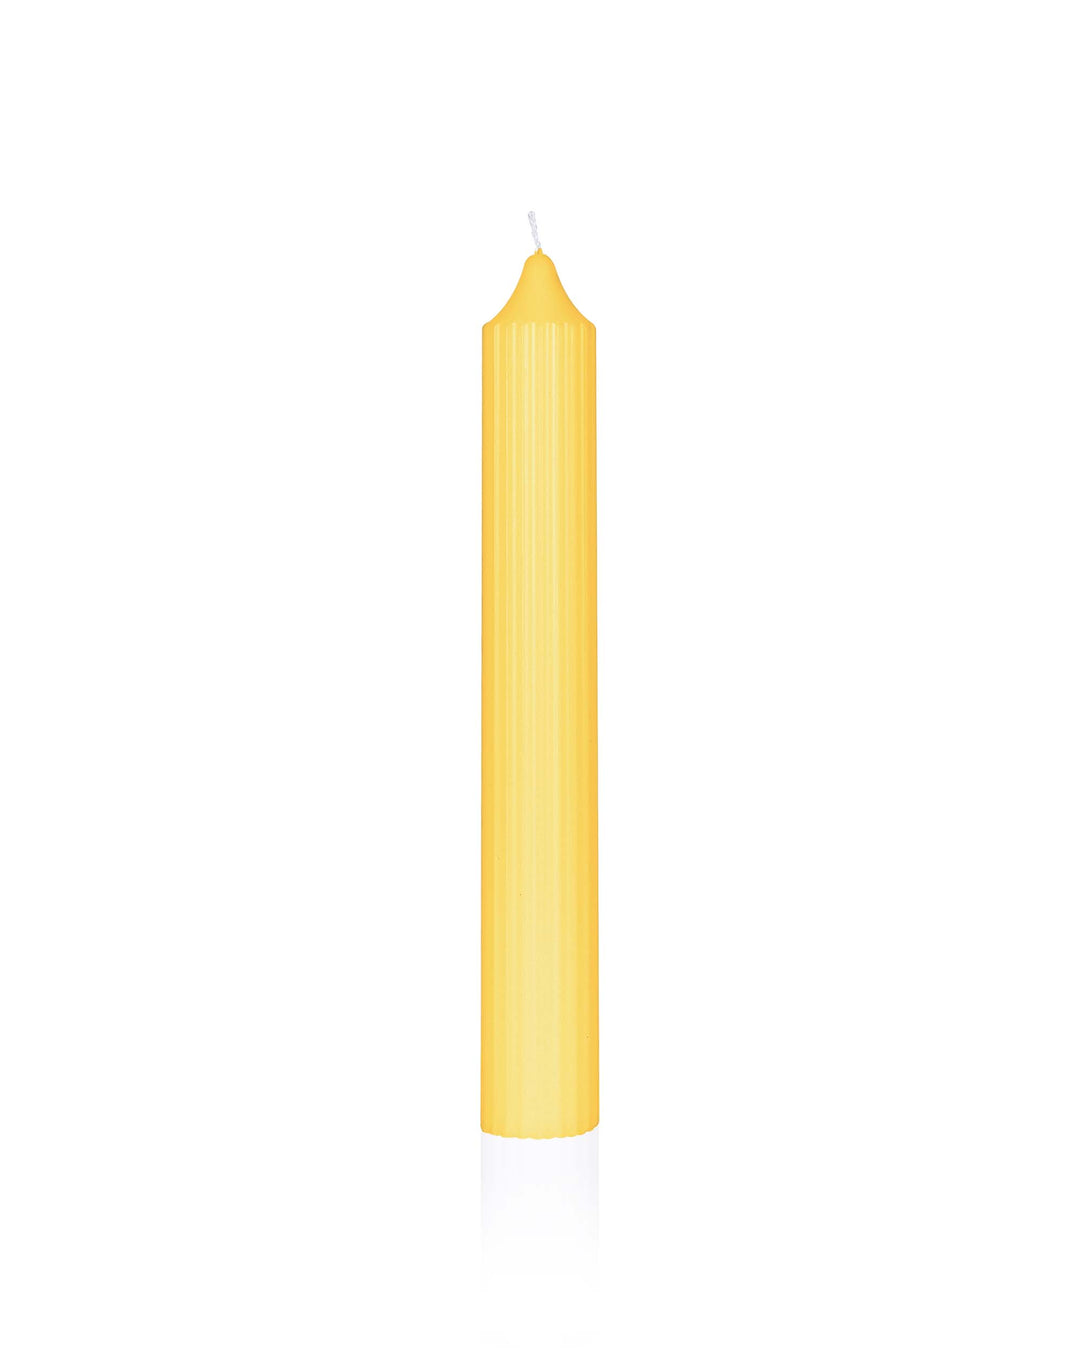 35mm x 250mm Ribbed Pure Beeswax Candle (2pcs)